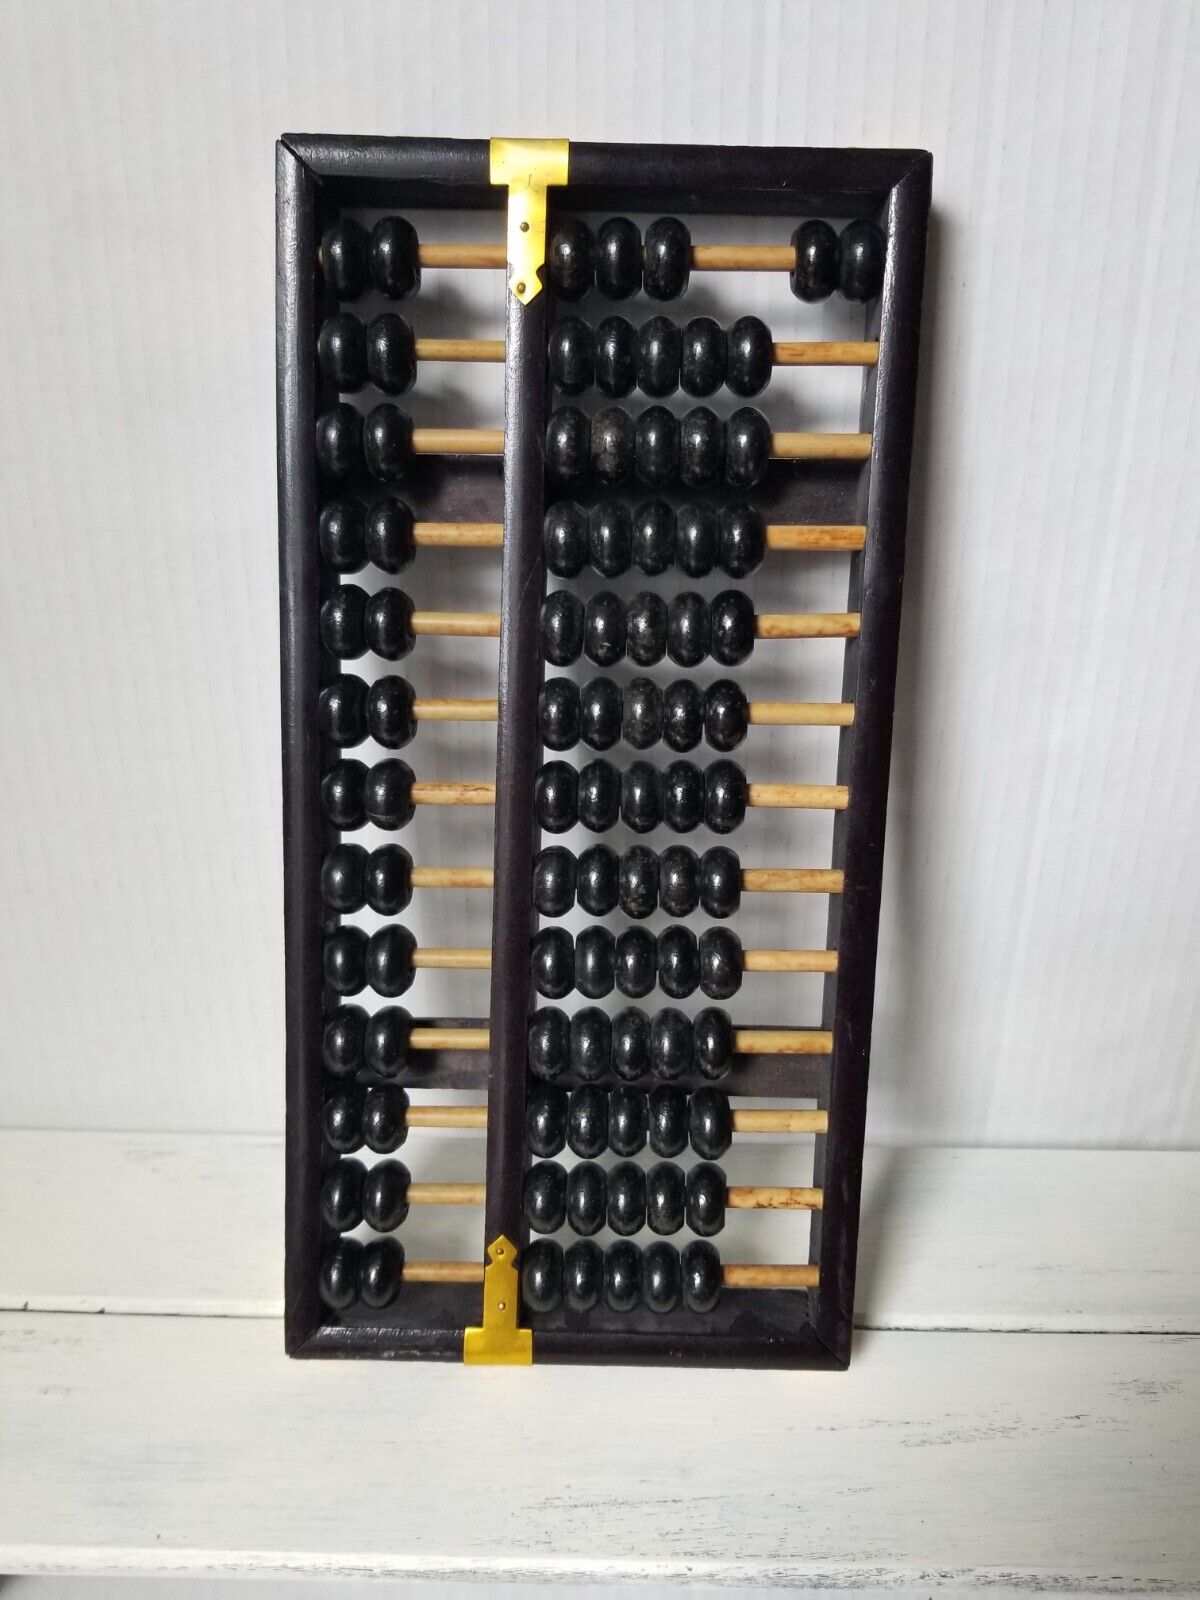 Abacus,Lotus Flower Brand 13 Rows Vintage Calculator,People\'s Republic of China